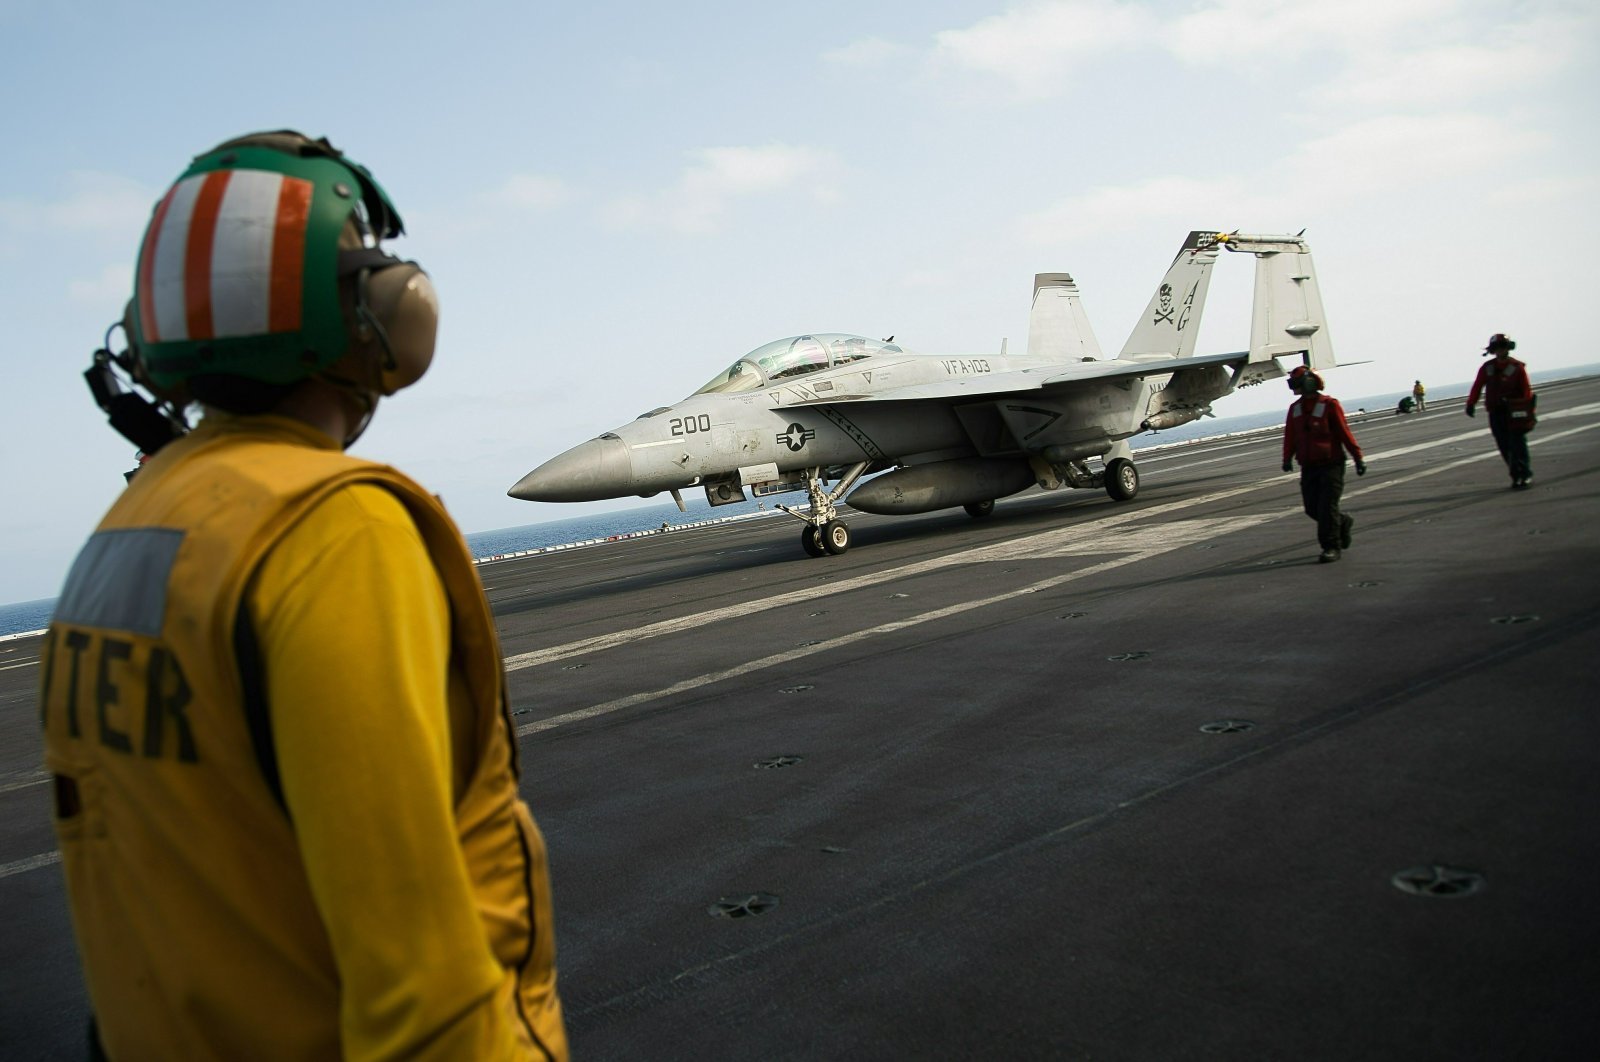 A crew member looks at a taxing F/A-18 fighter jet on the deck of the USS Abraham Lincoln aircraft carrier in the Persian Gulf, June 3, 2019. (AP Photo)